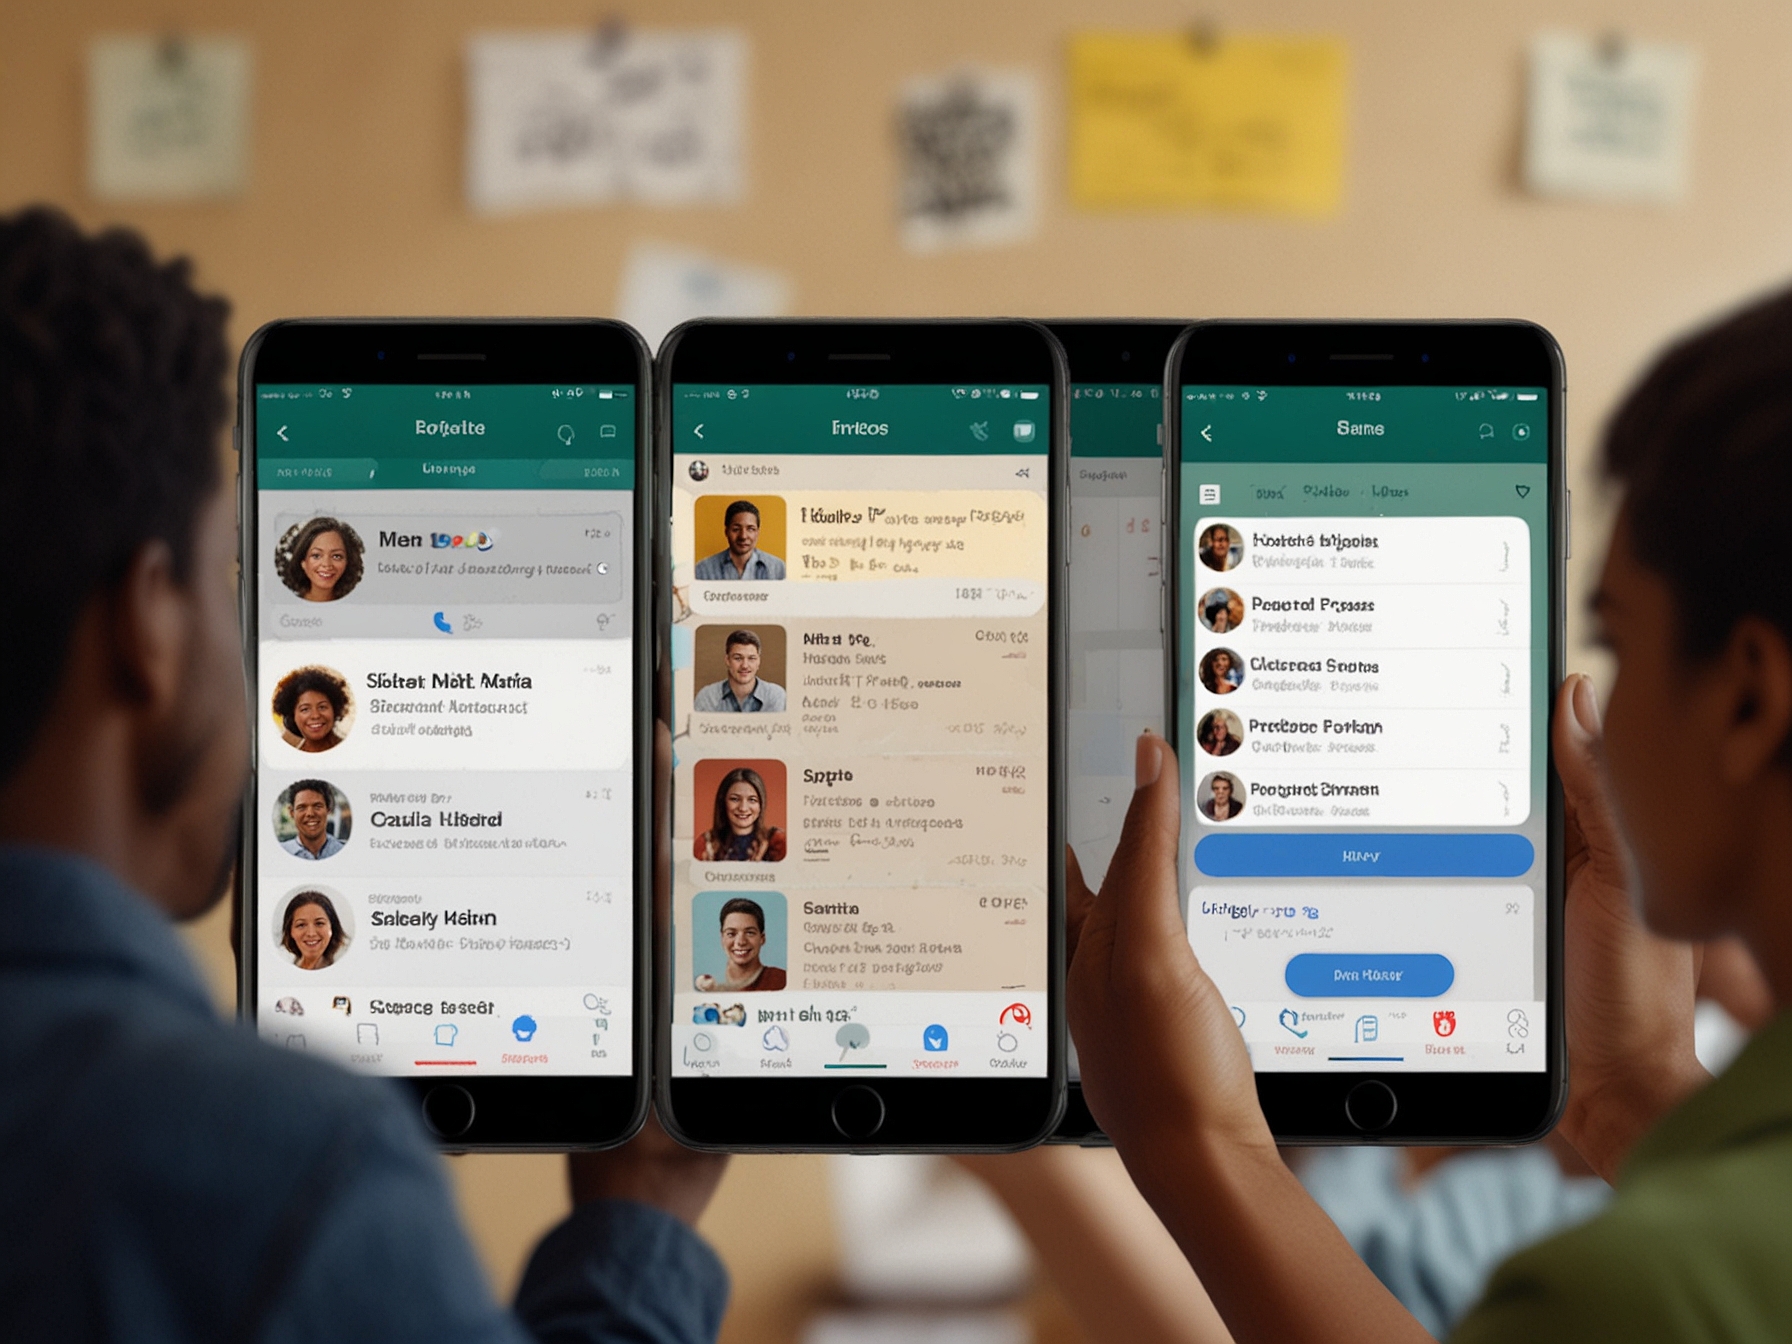 An illustration of multiple users collaborating in real-time on a single note using the updated Notes app in iOS 18, showcasing new sharing options and permissions.